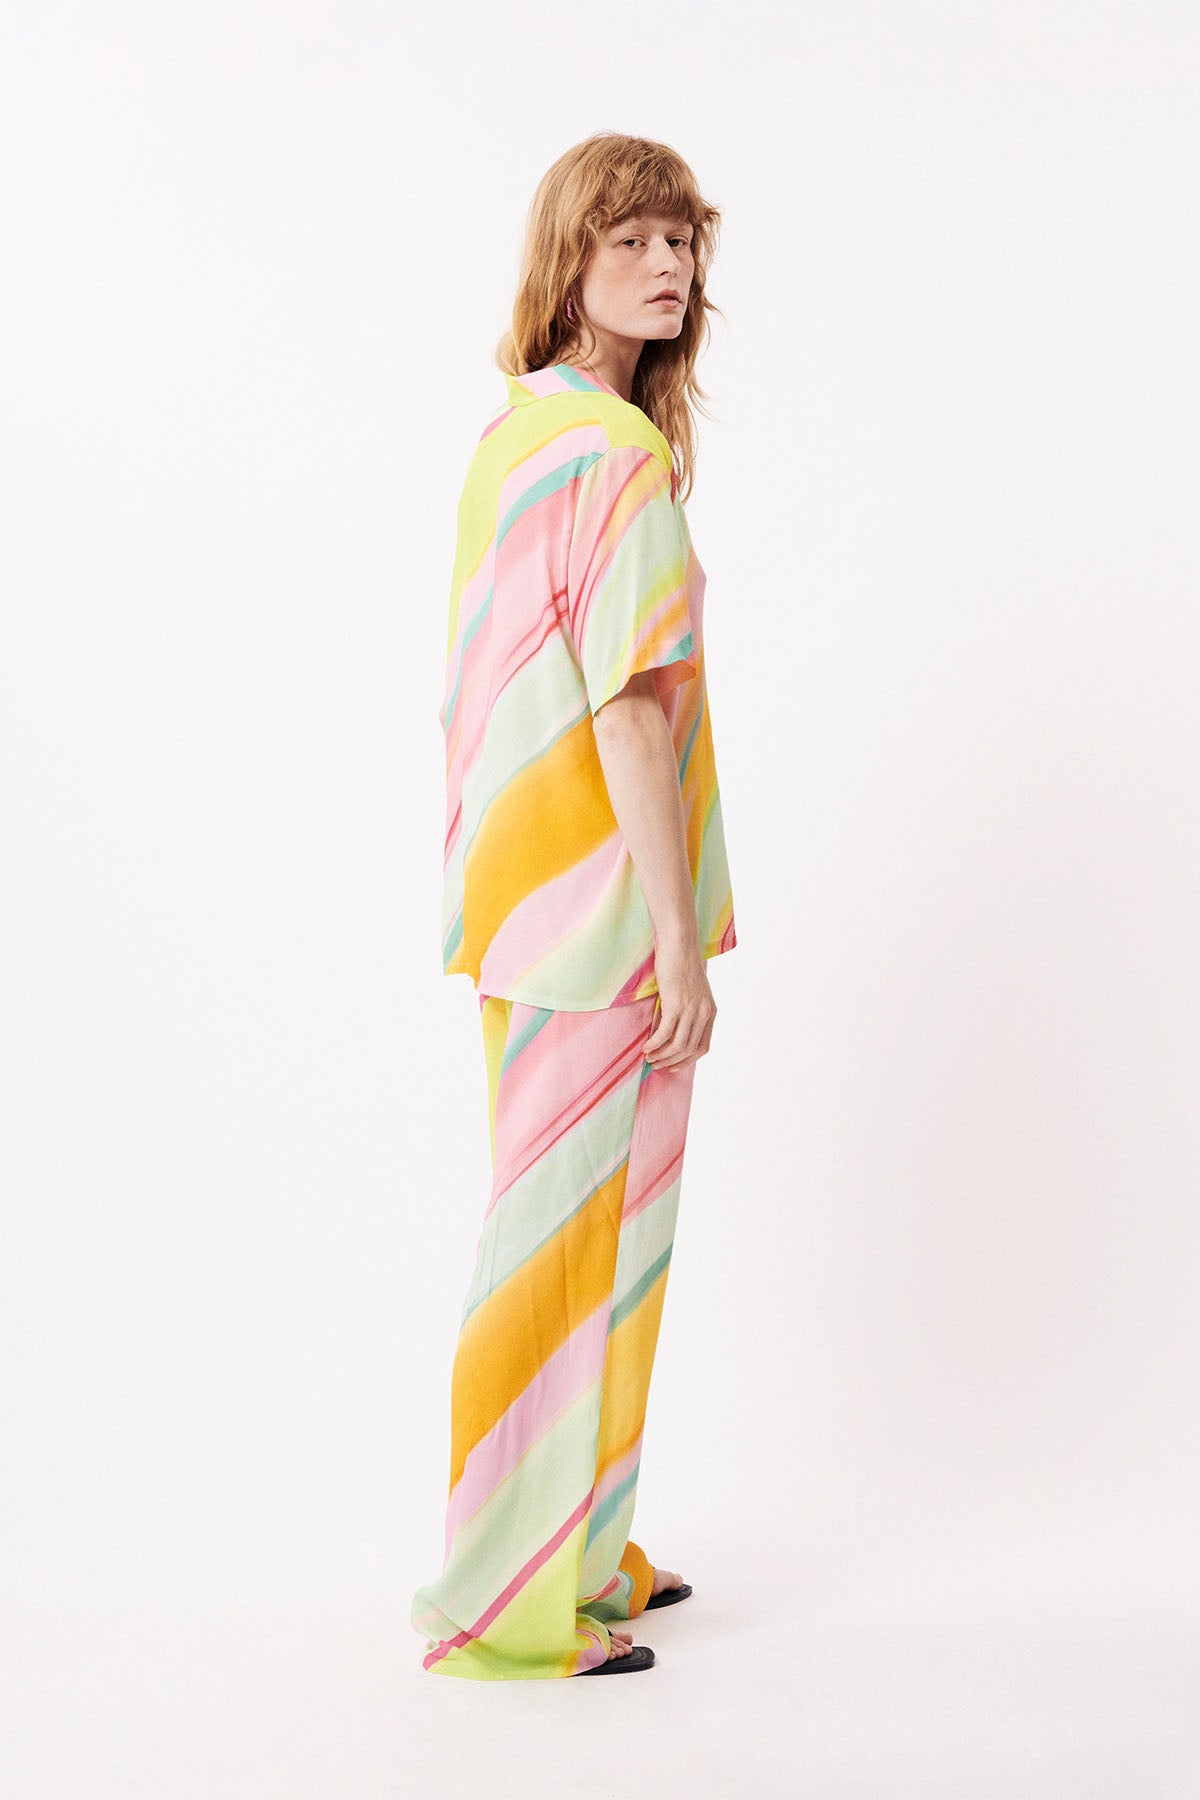 FRNCH - Shelly Woven Blouse - Diagonal Rainbow - Back